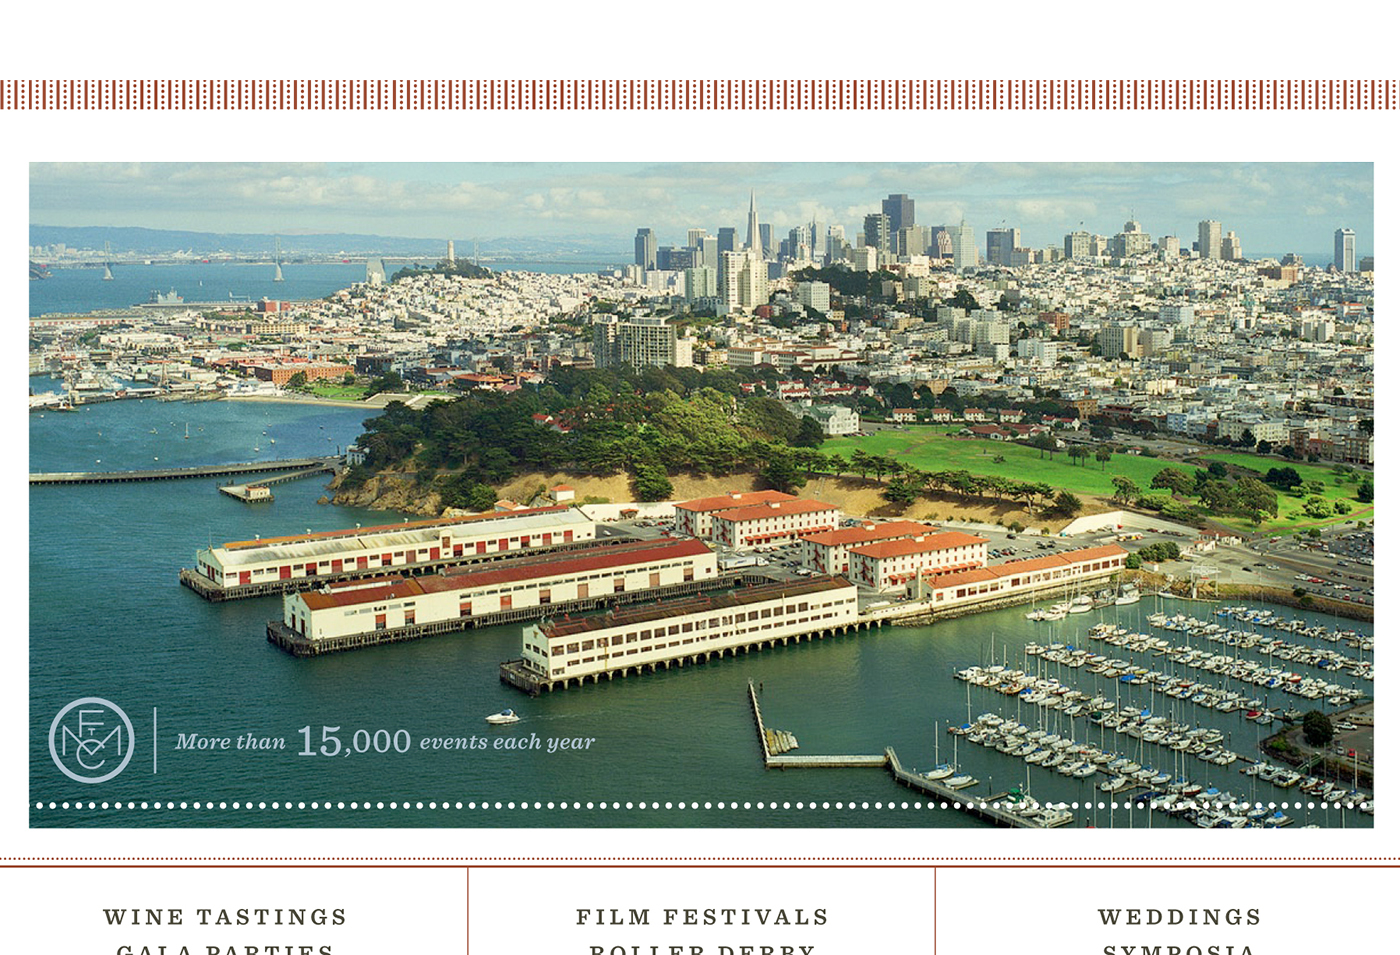 Fort Mason Center: More than 15,000 events each year